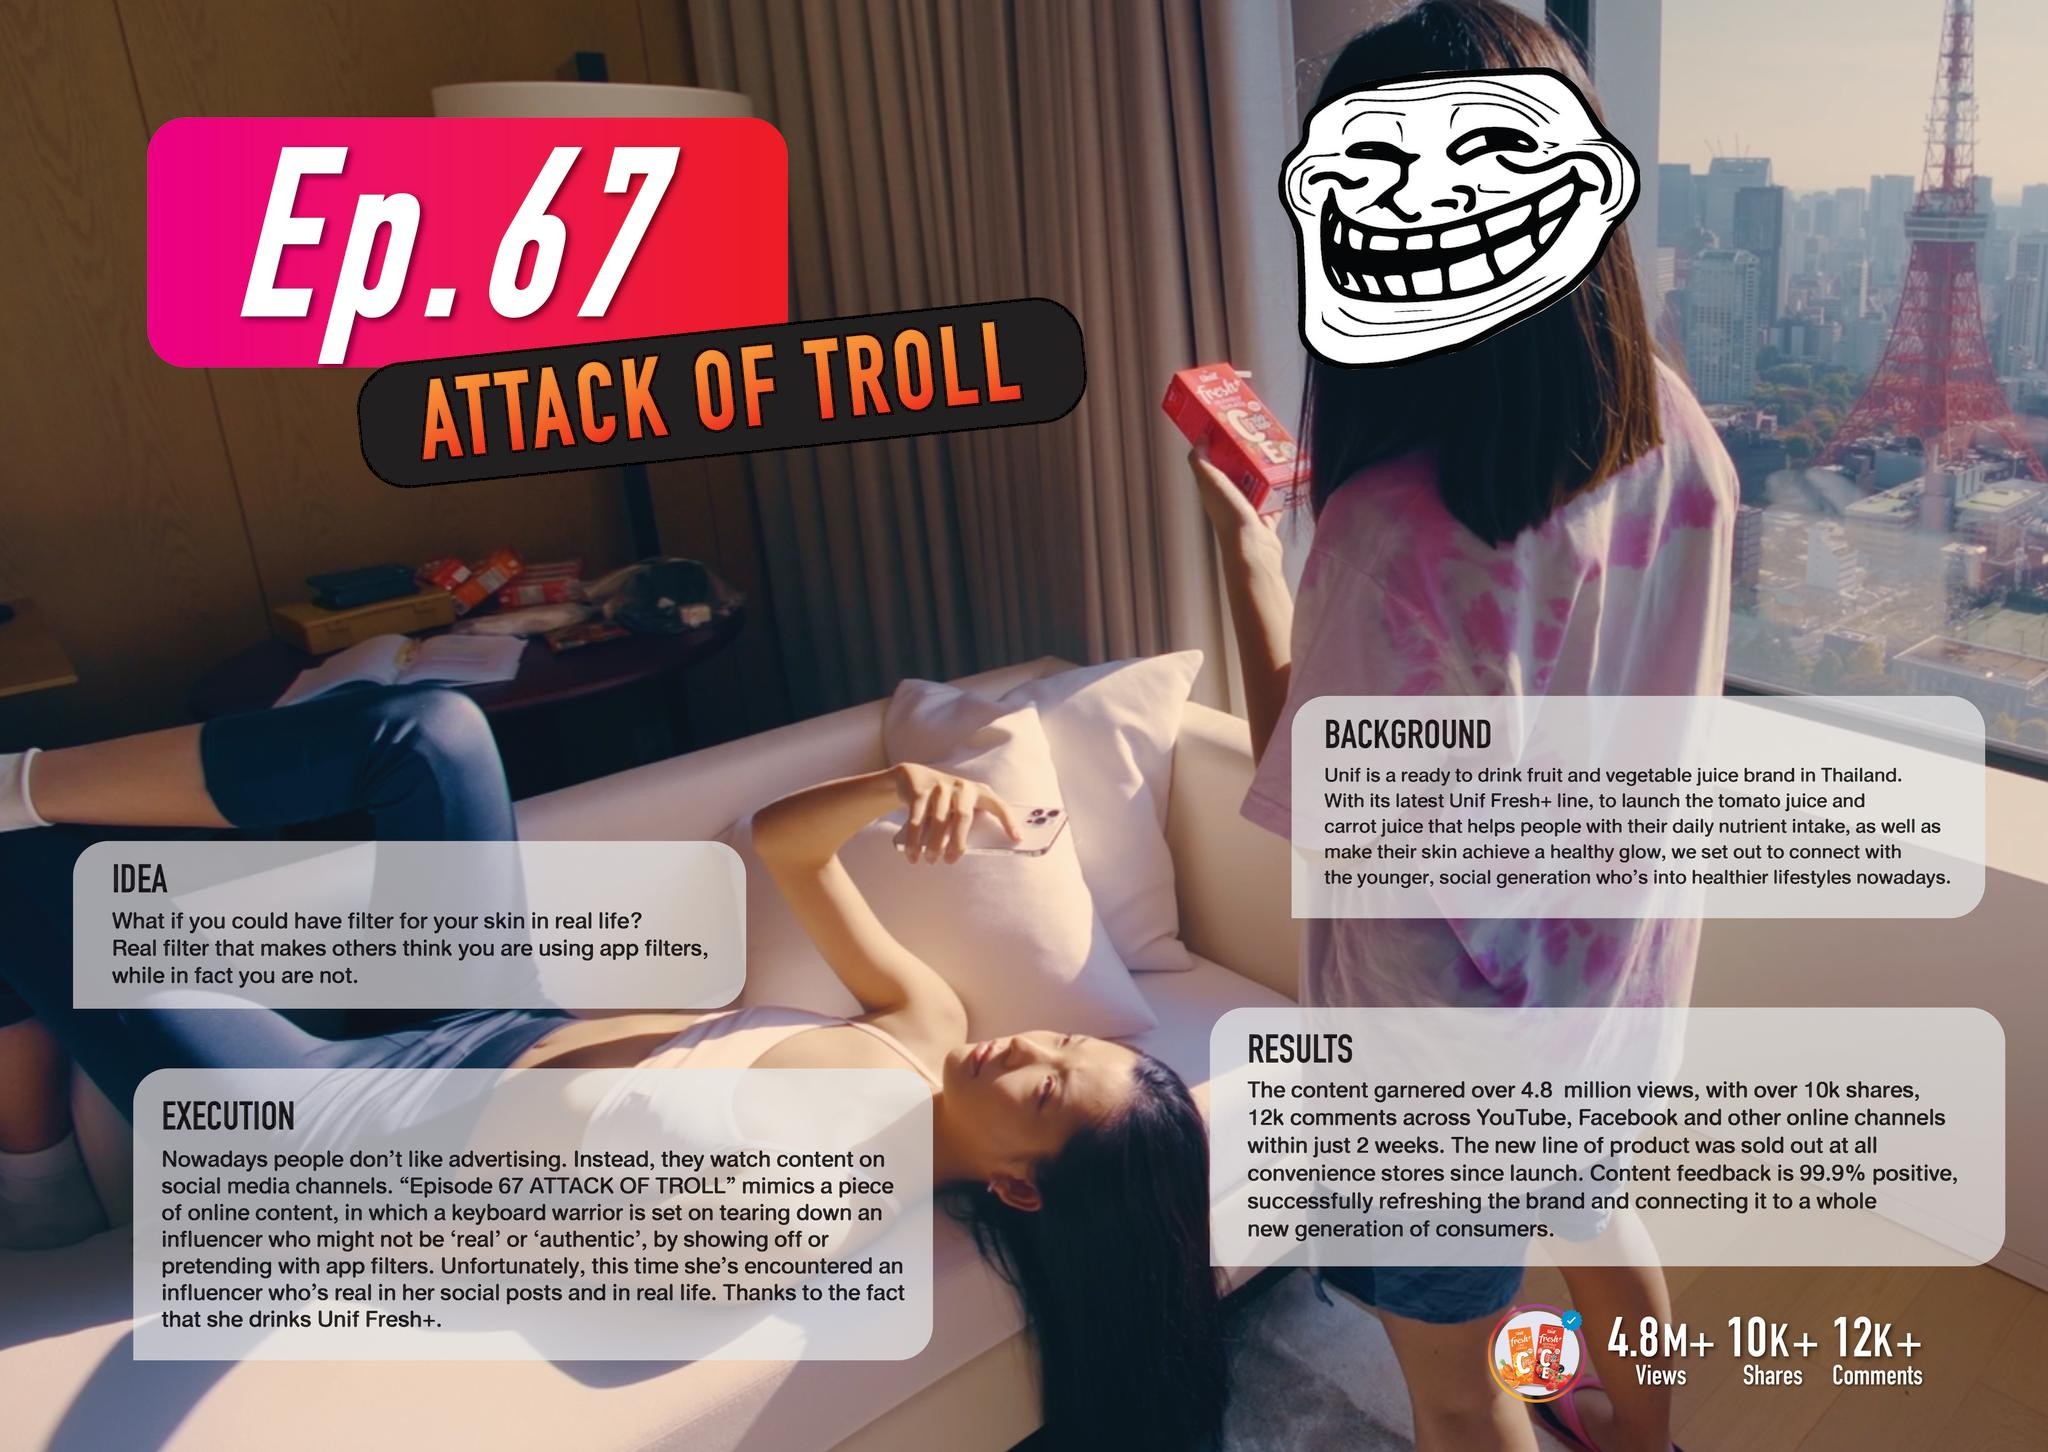 Ep. 67 ATTACK OF TROLL